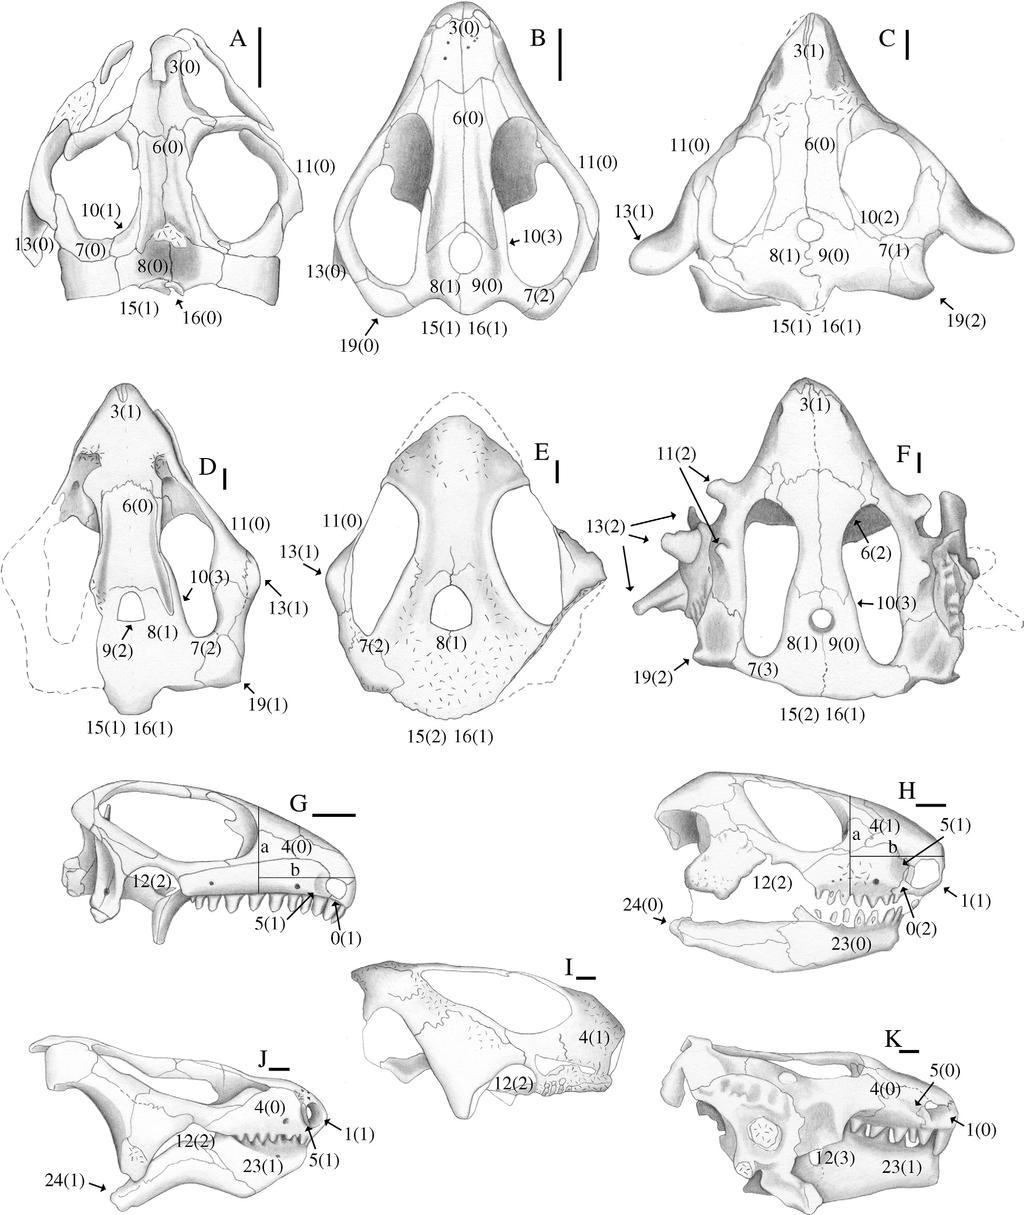 350 J. C. Cisneros Figure 1 Crania of procolophonoids in dorsal (A F) and right lateral (G K) views, showing some characters used in this study (states indicated in brackets).